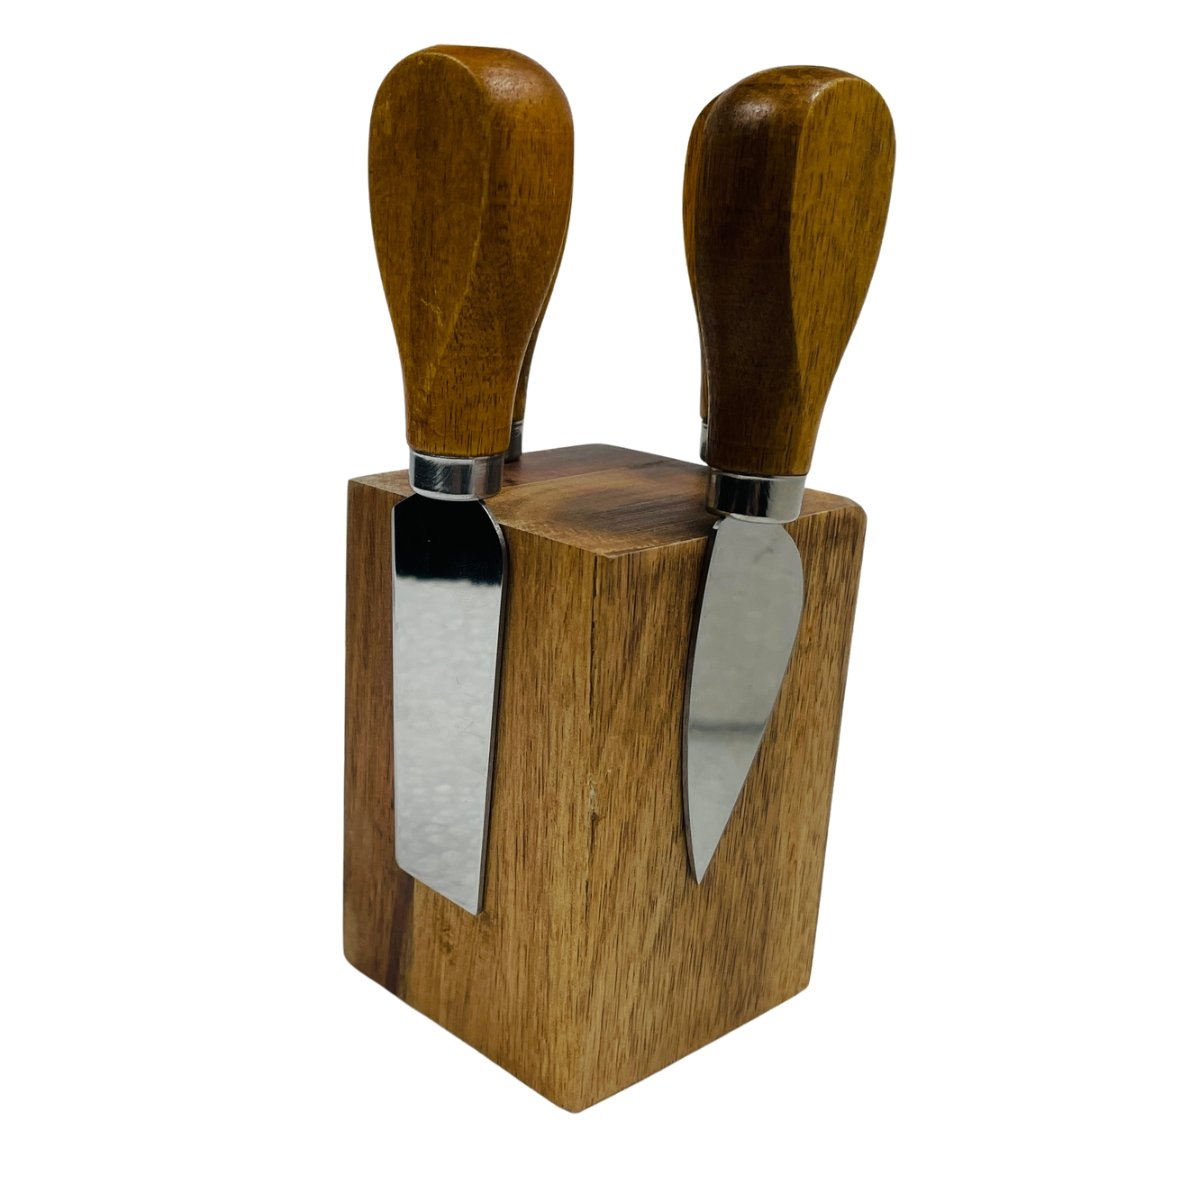 Acacia Wood Cheese Knife Set with Magnetic Block - Rustic Furniture Outlet